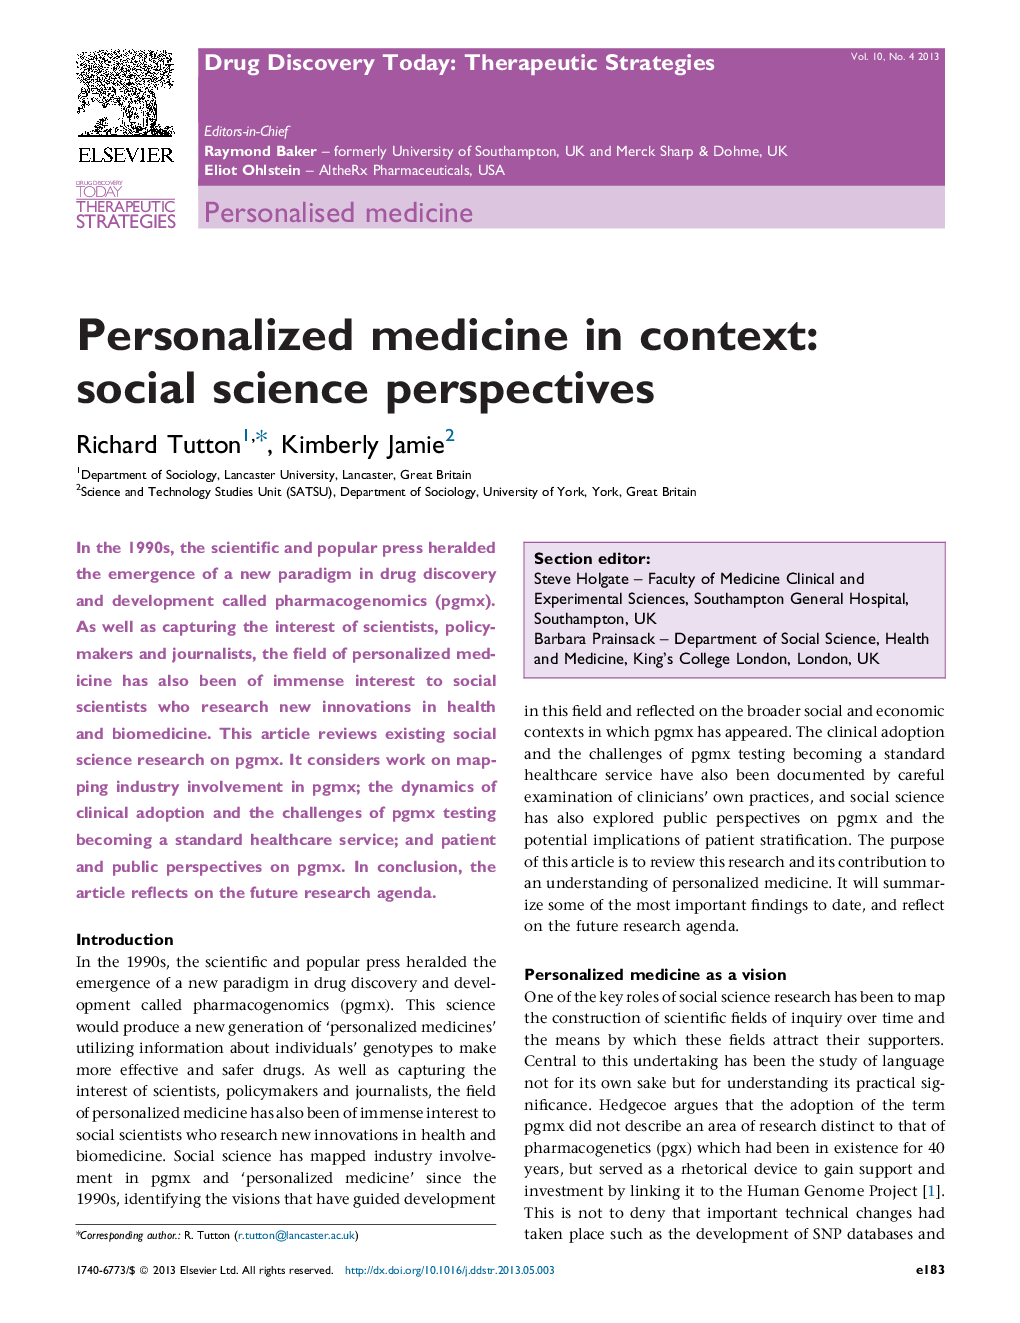 Personalized medicine in context: social science perspectives